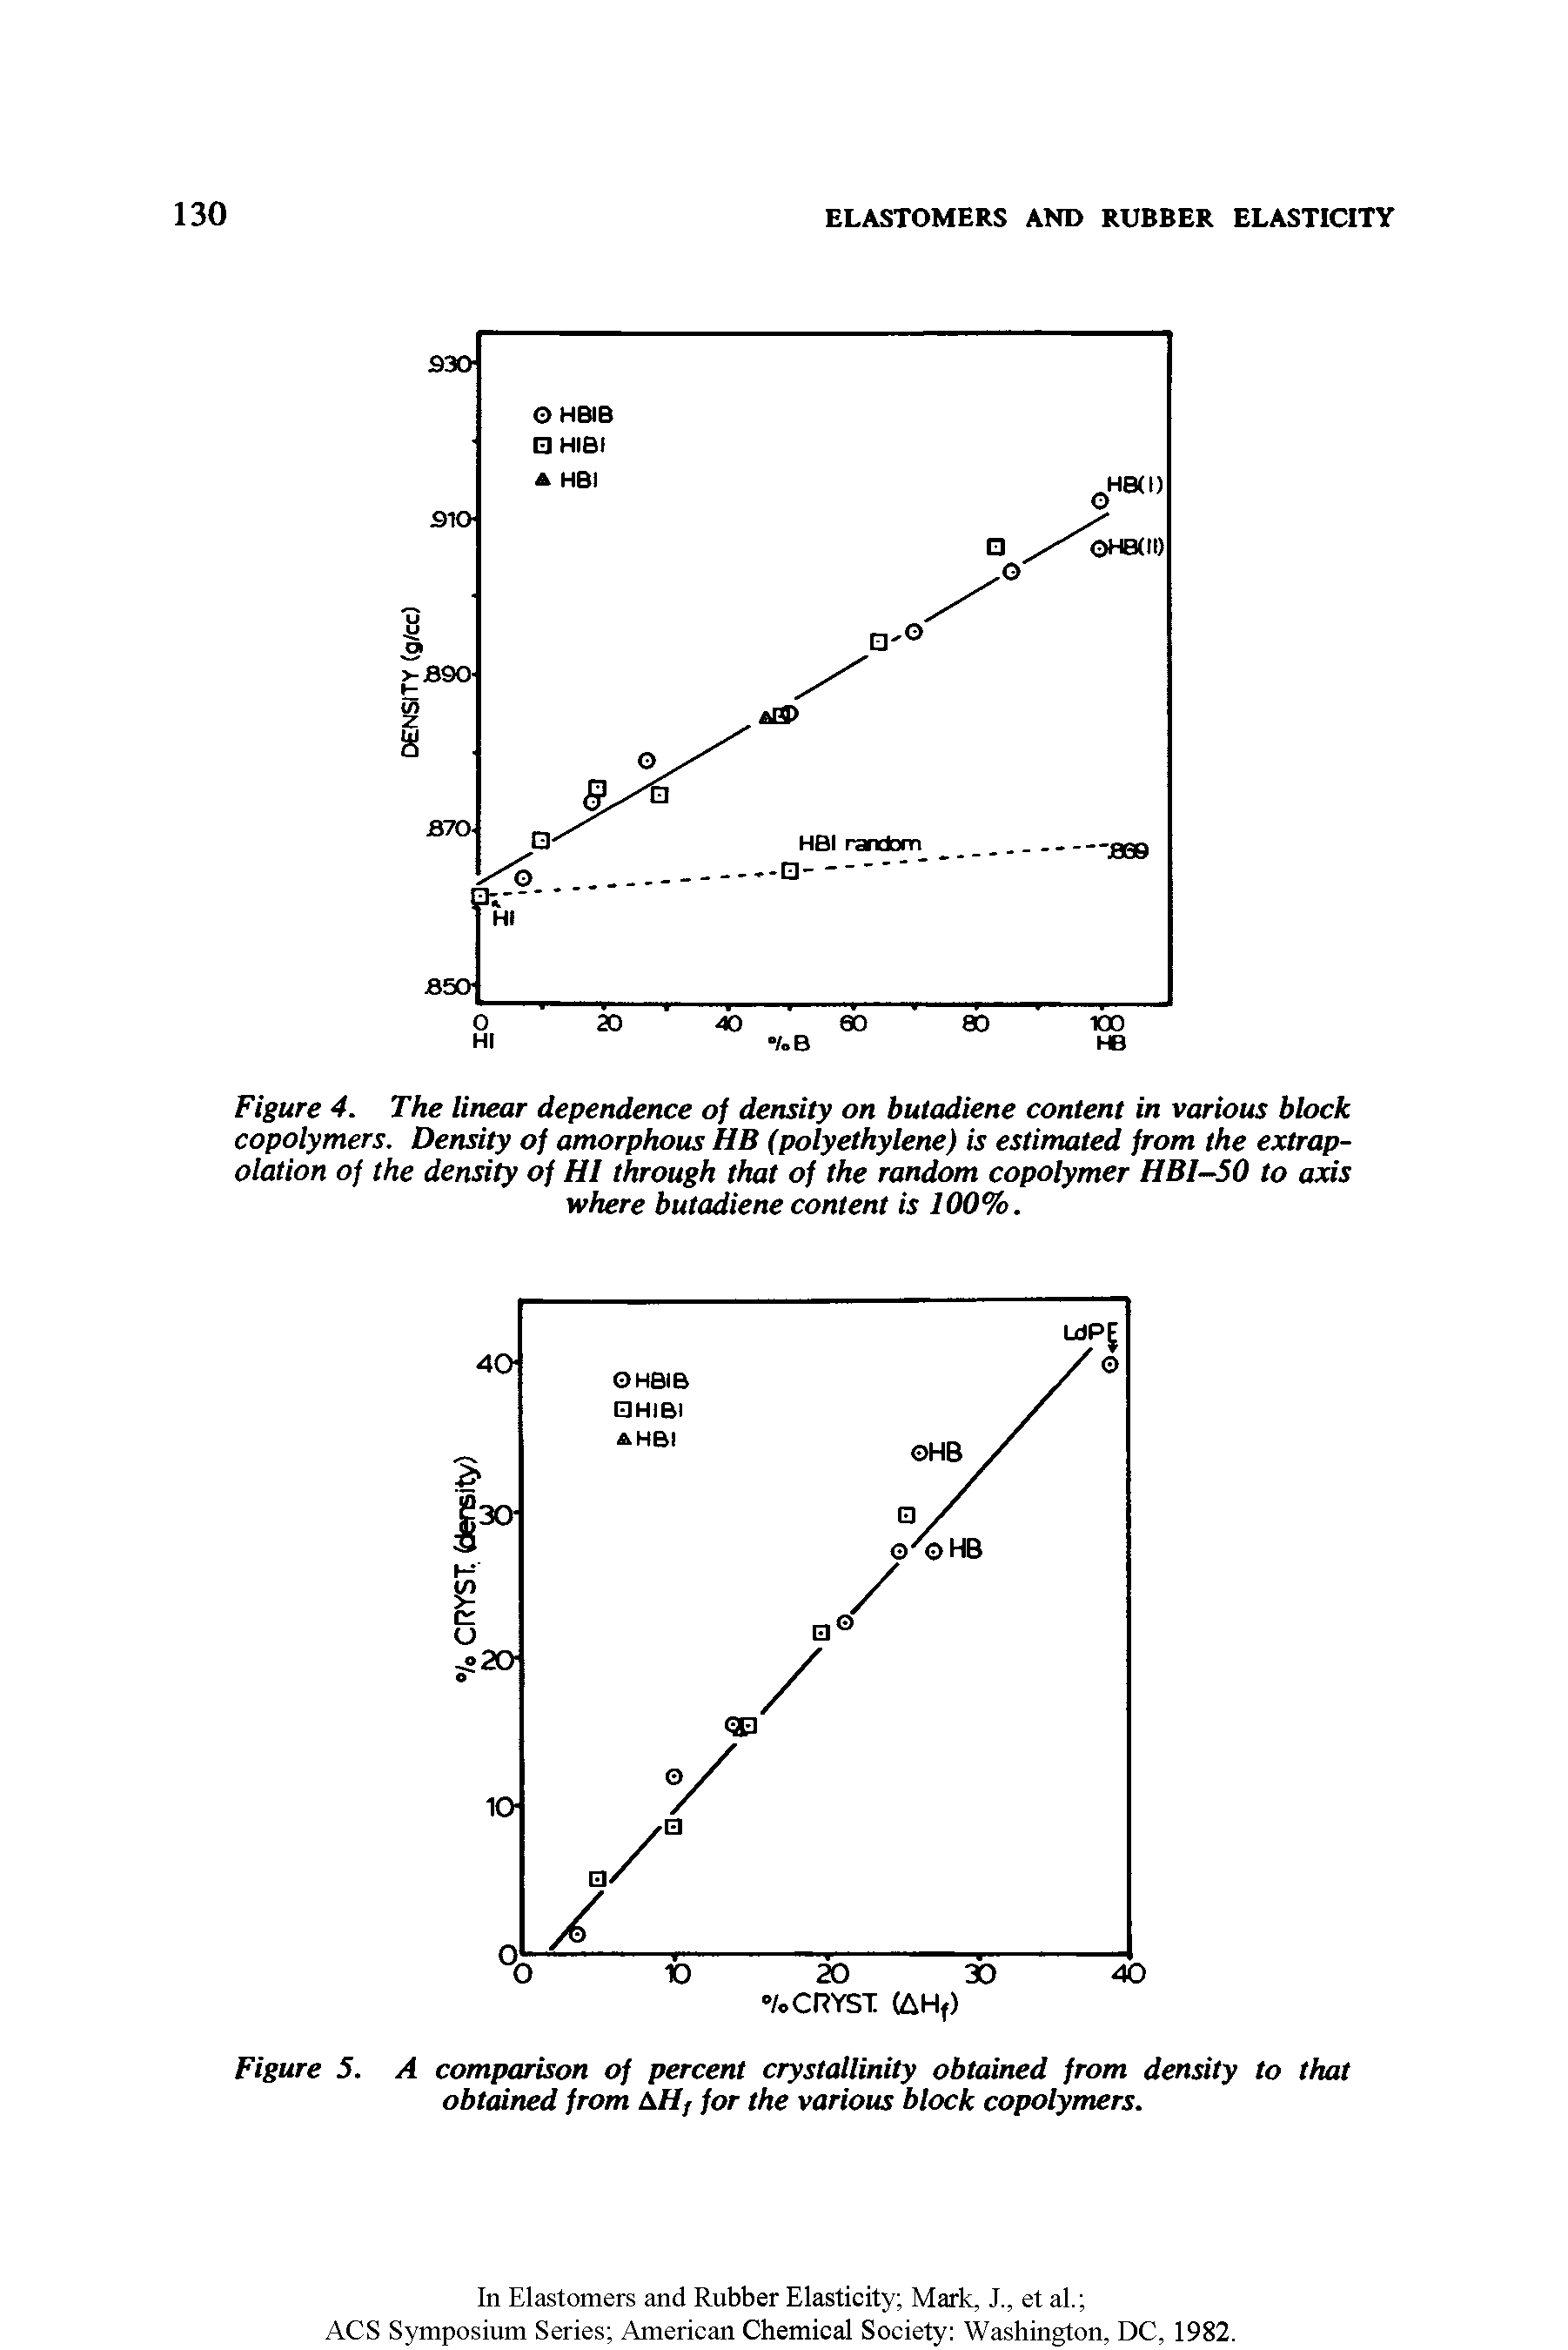 Figure 5. A comparison of percent crystallinity obtained from density to that obtained from AHf for the various block copolymers.